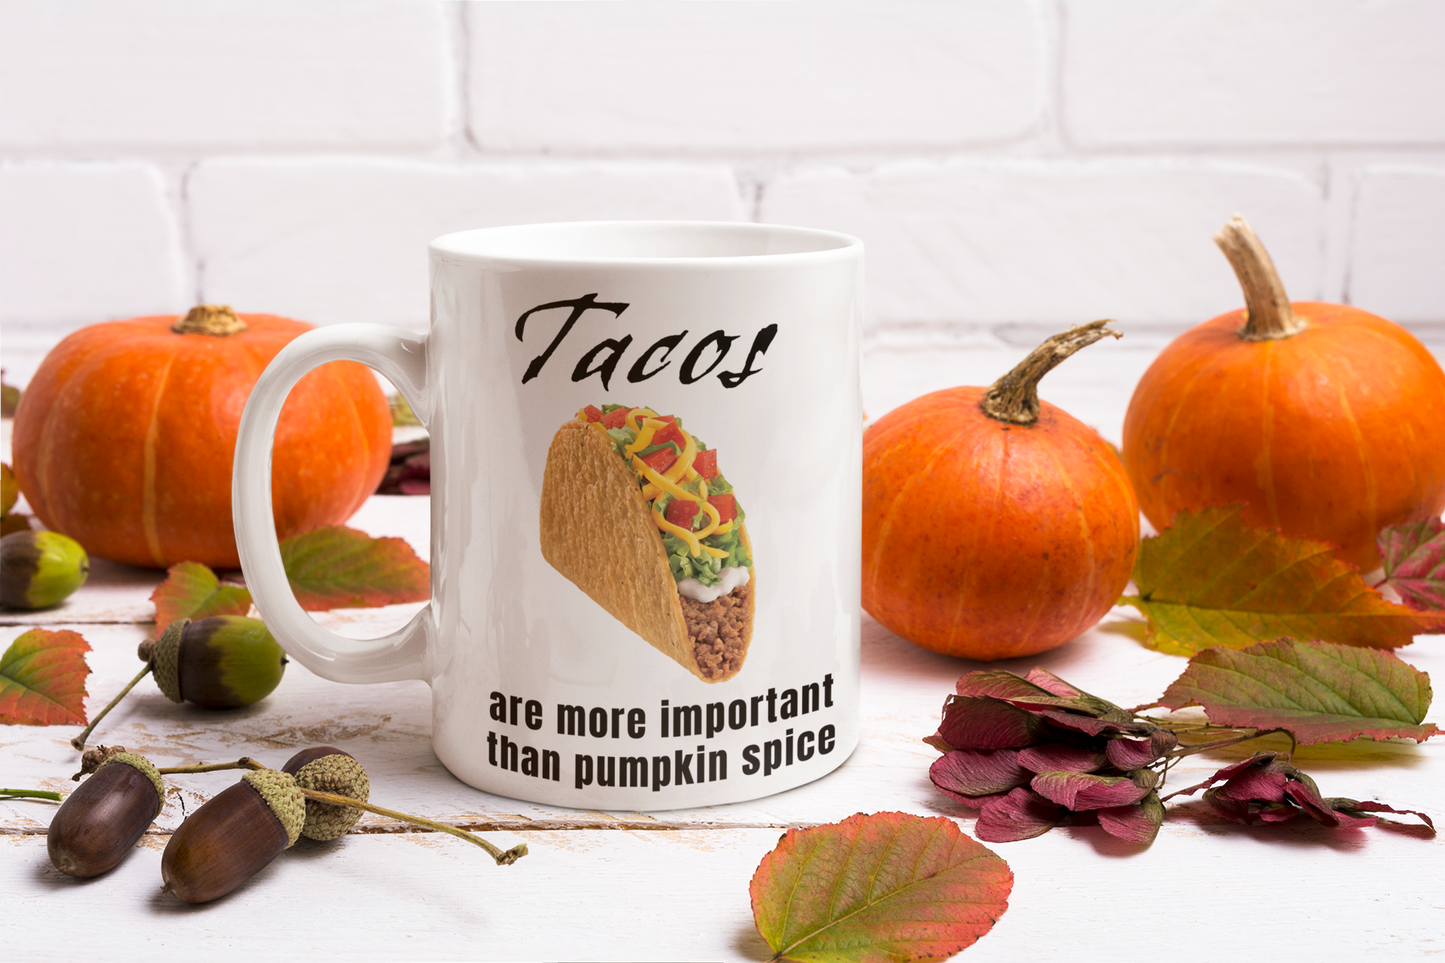 Tacos are more important than Pumpkin Spice - White glossy mug